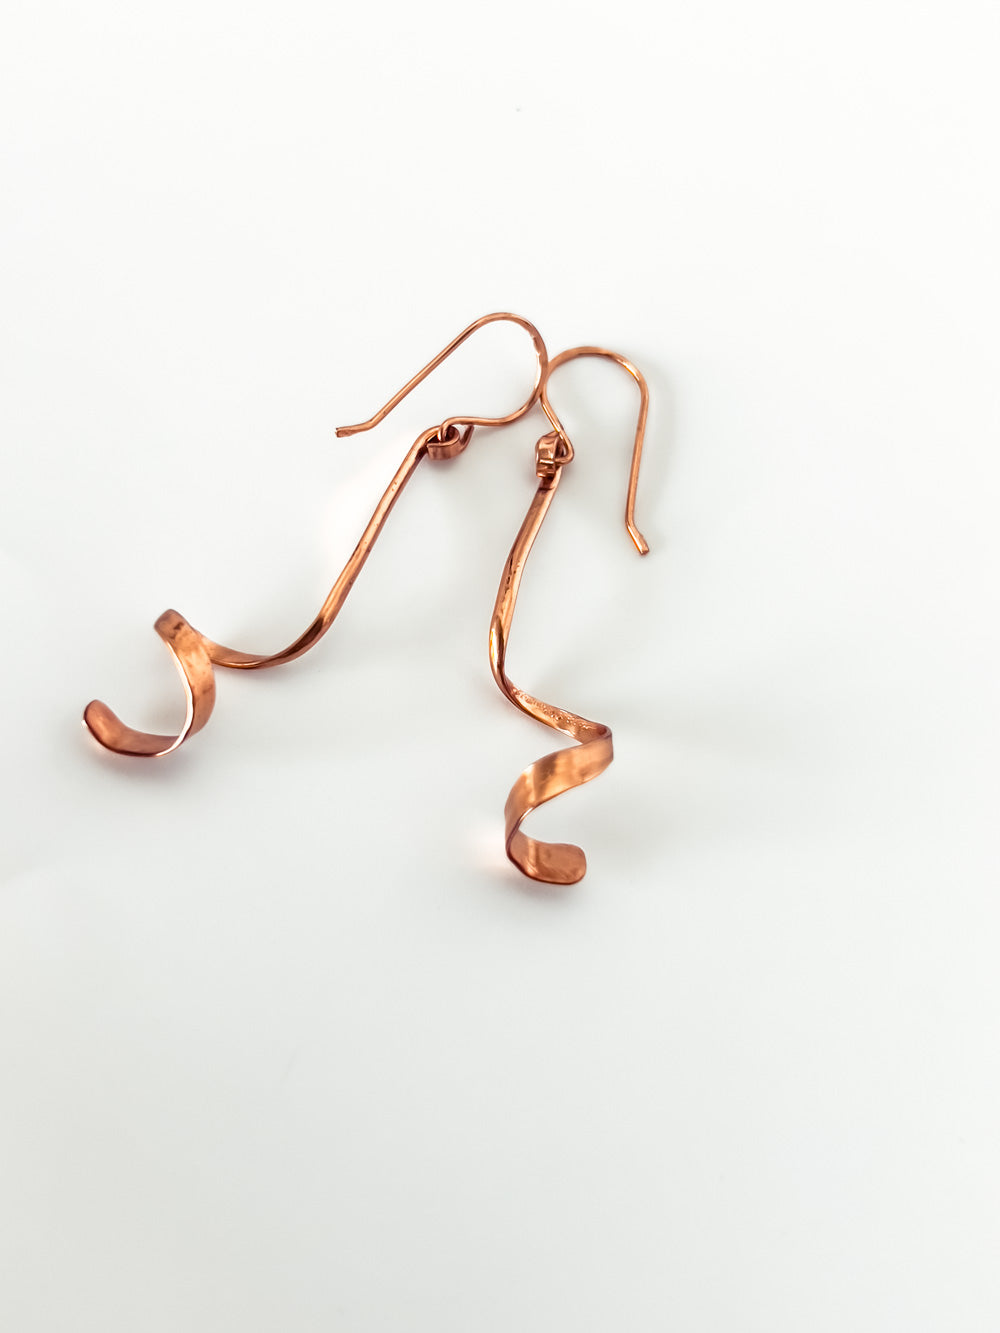 Lacquered Hammered Copper Coiled Earrings